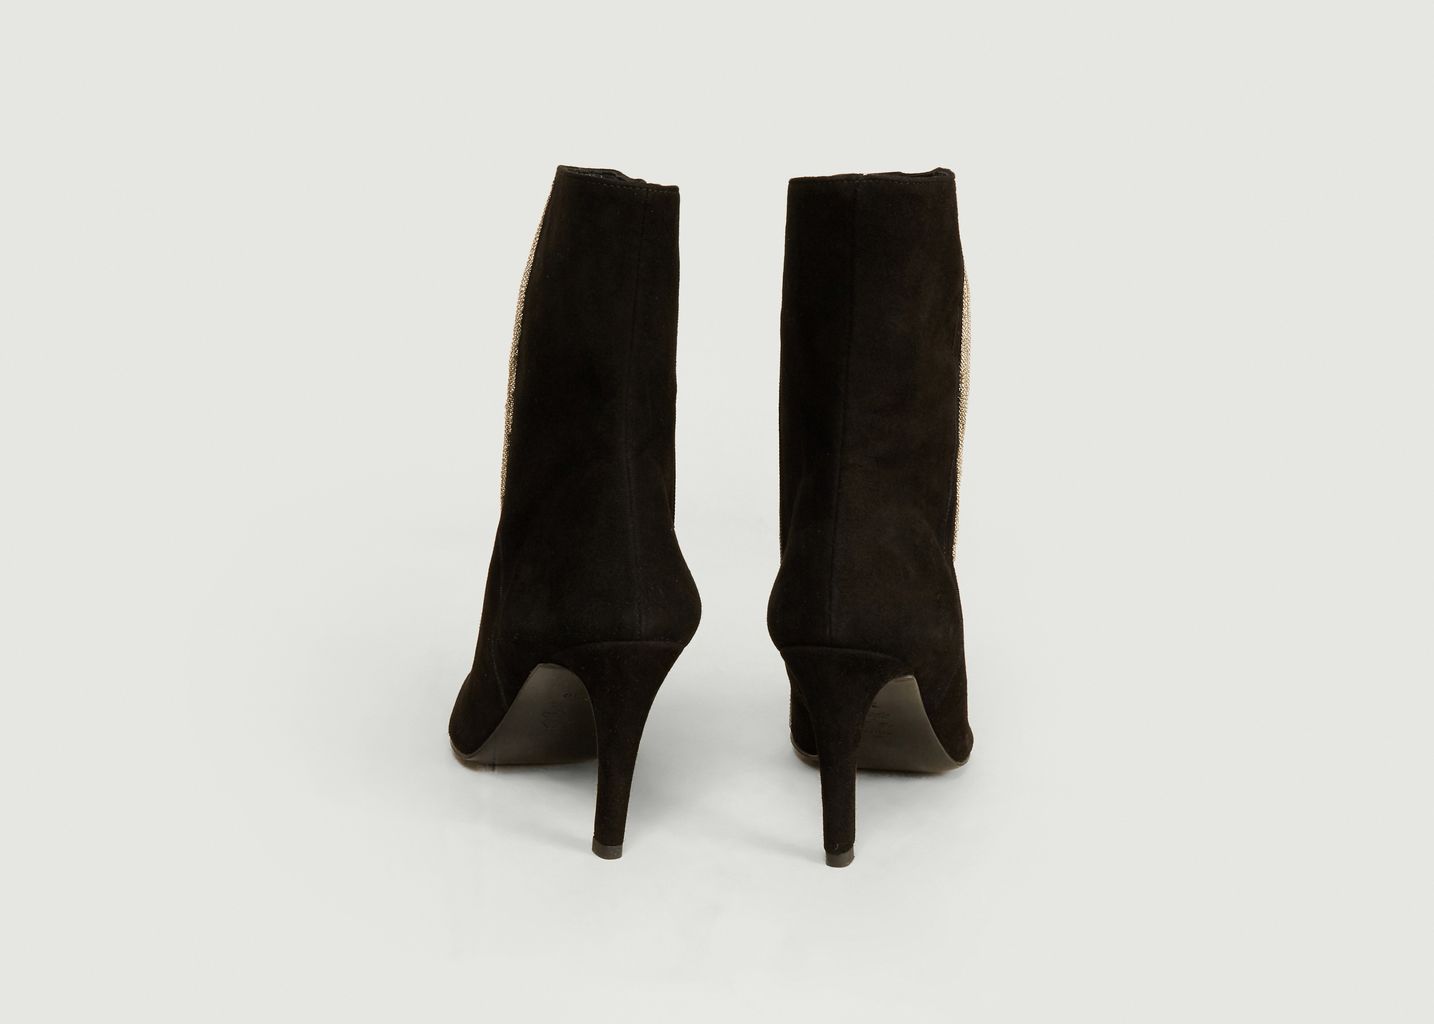 Frankie suede leather and chain boots - Sarah de Saint Hubert